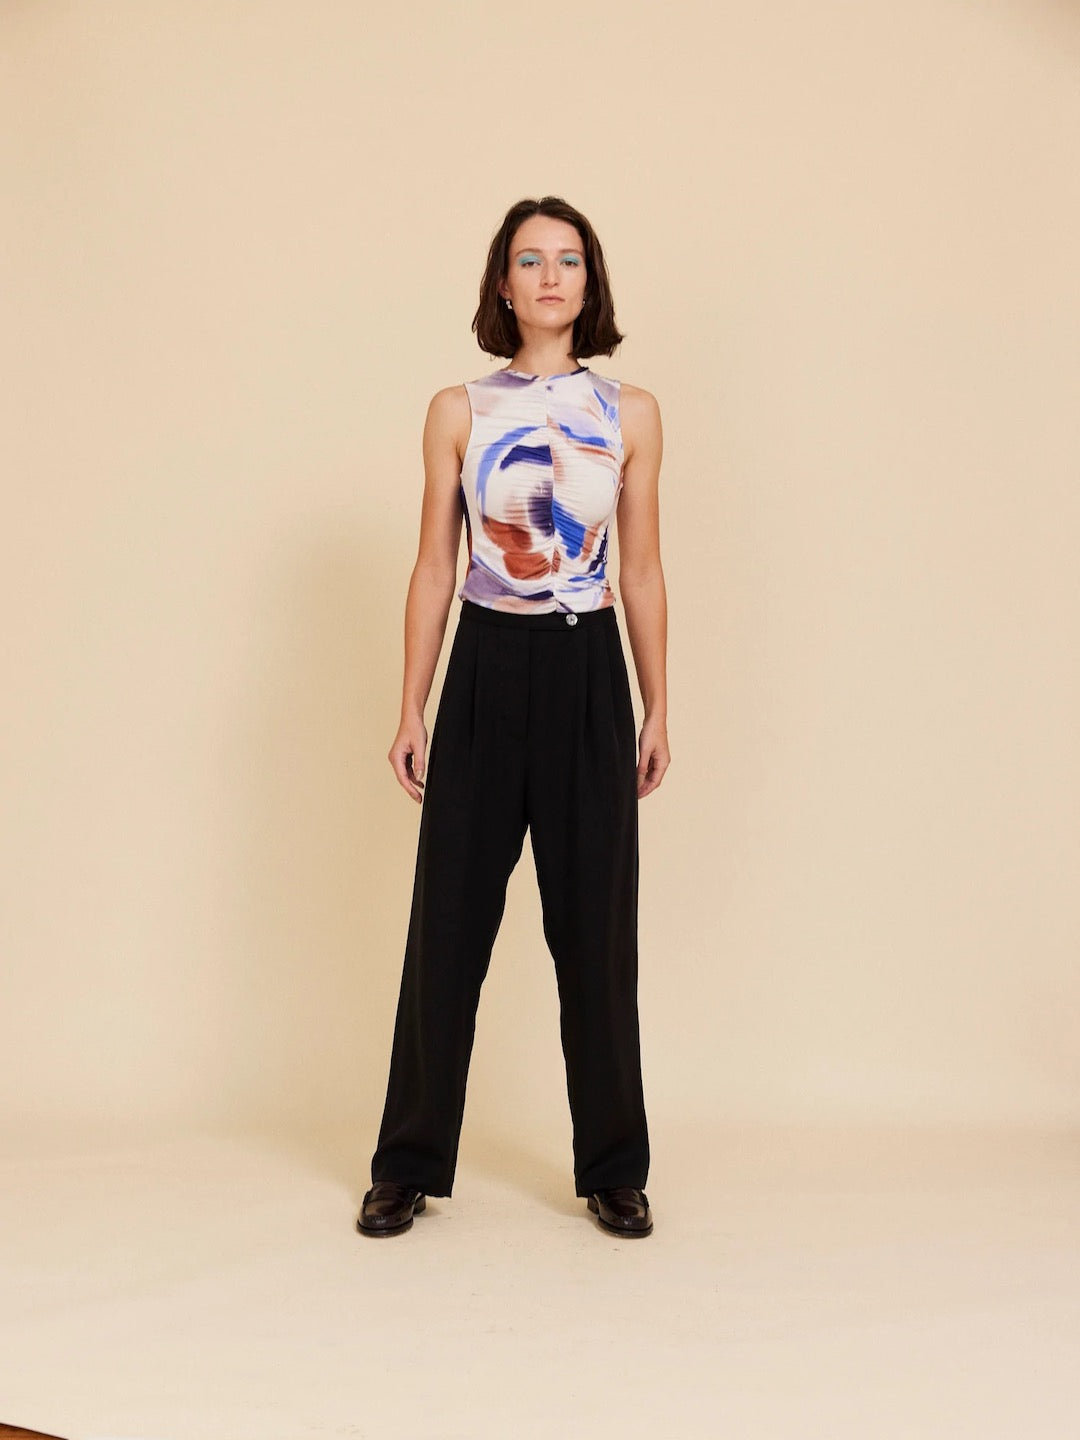 A woman wearing OVNA OVICH's Me Time Trouser – Onyx and a black top.